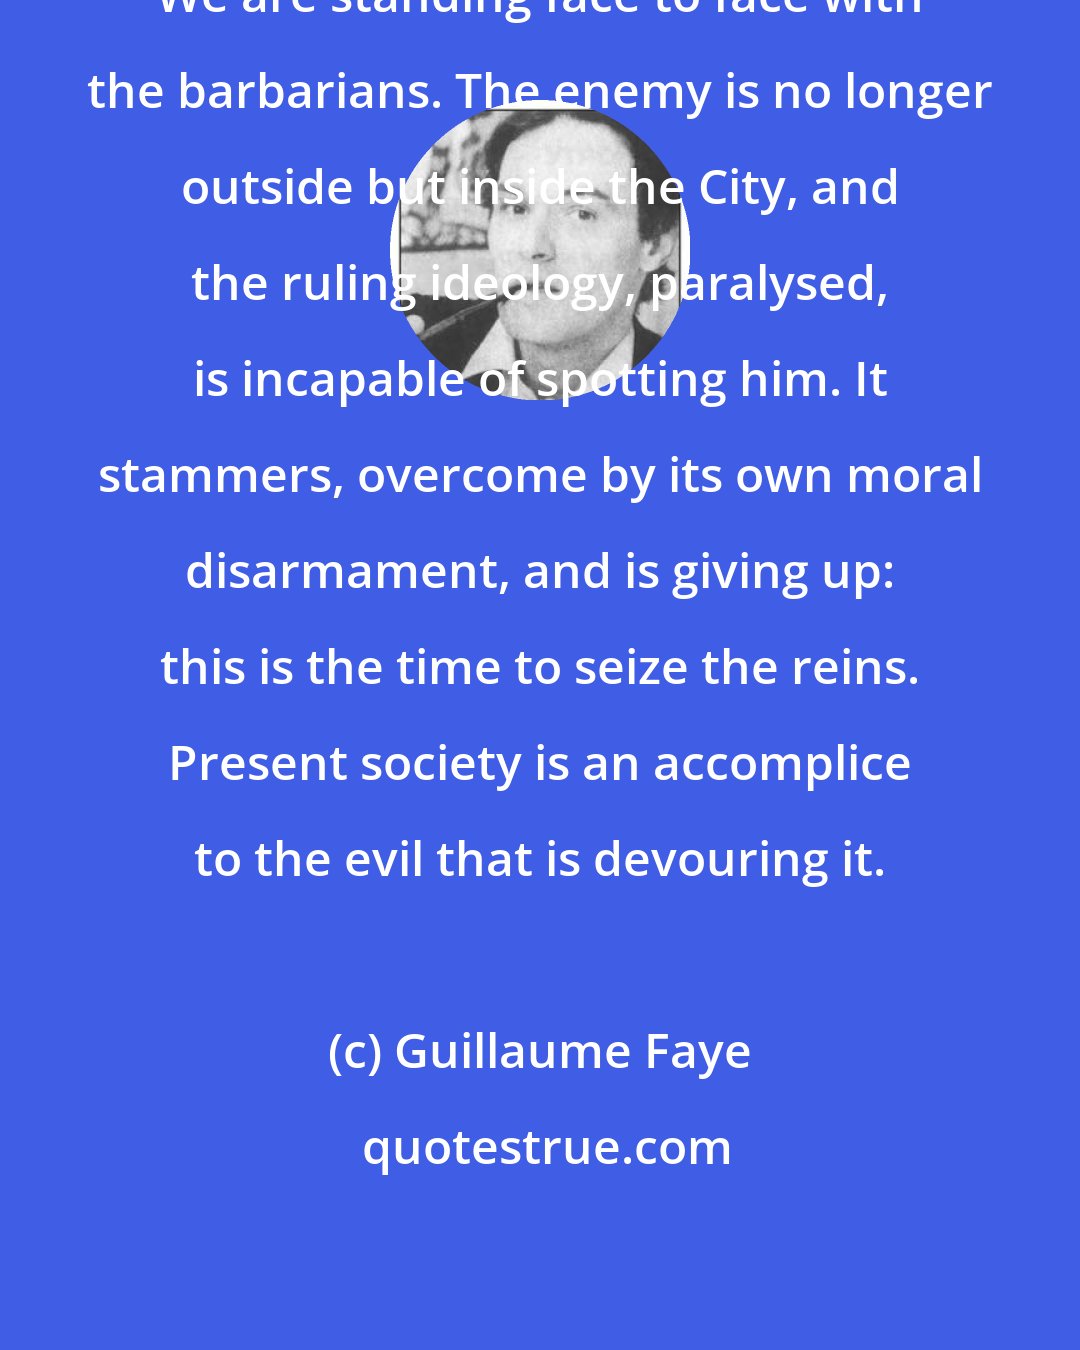 Guillaume Faye: We are standing face to face with the barbarians. The enemy is no longer outside but inside the City, and the ruling ideology, paralysed, is incapable of spotting him. It stammers, overcome by its own moral disarmament, and is giving up: this is the time to seize the reins. Present society is an accomplice to the evil that is devouring it.